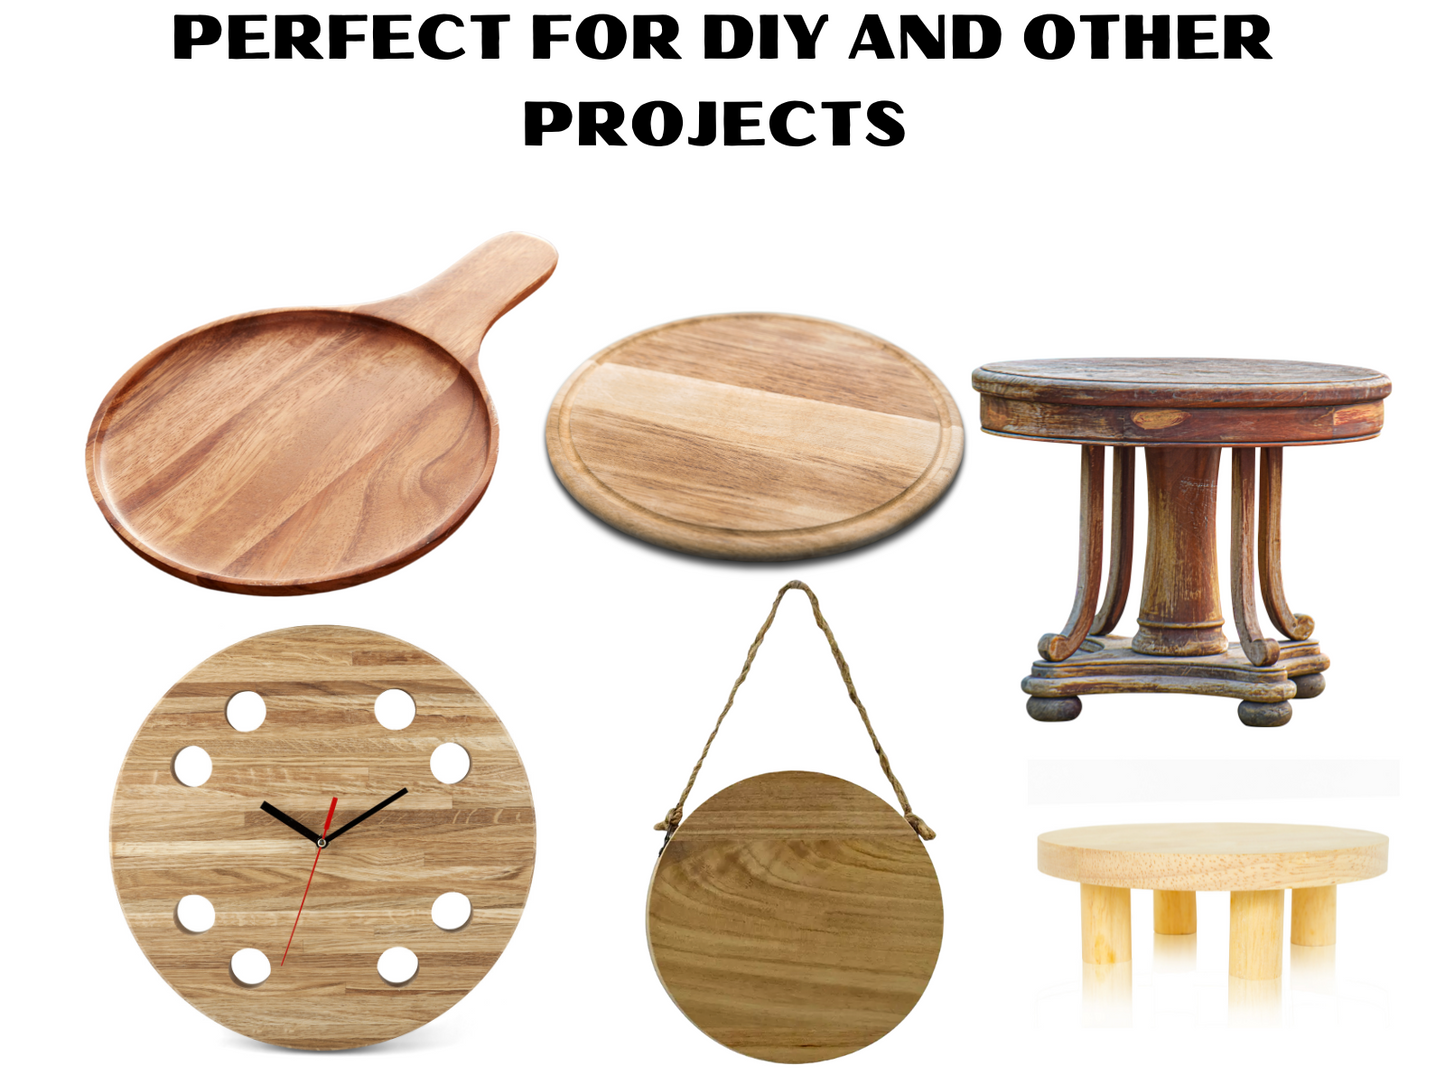 Set of 5 Pine Wooden Circles 24'' Diameter And 1'' Thick for Art ,Crafts & Other DIY Projects